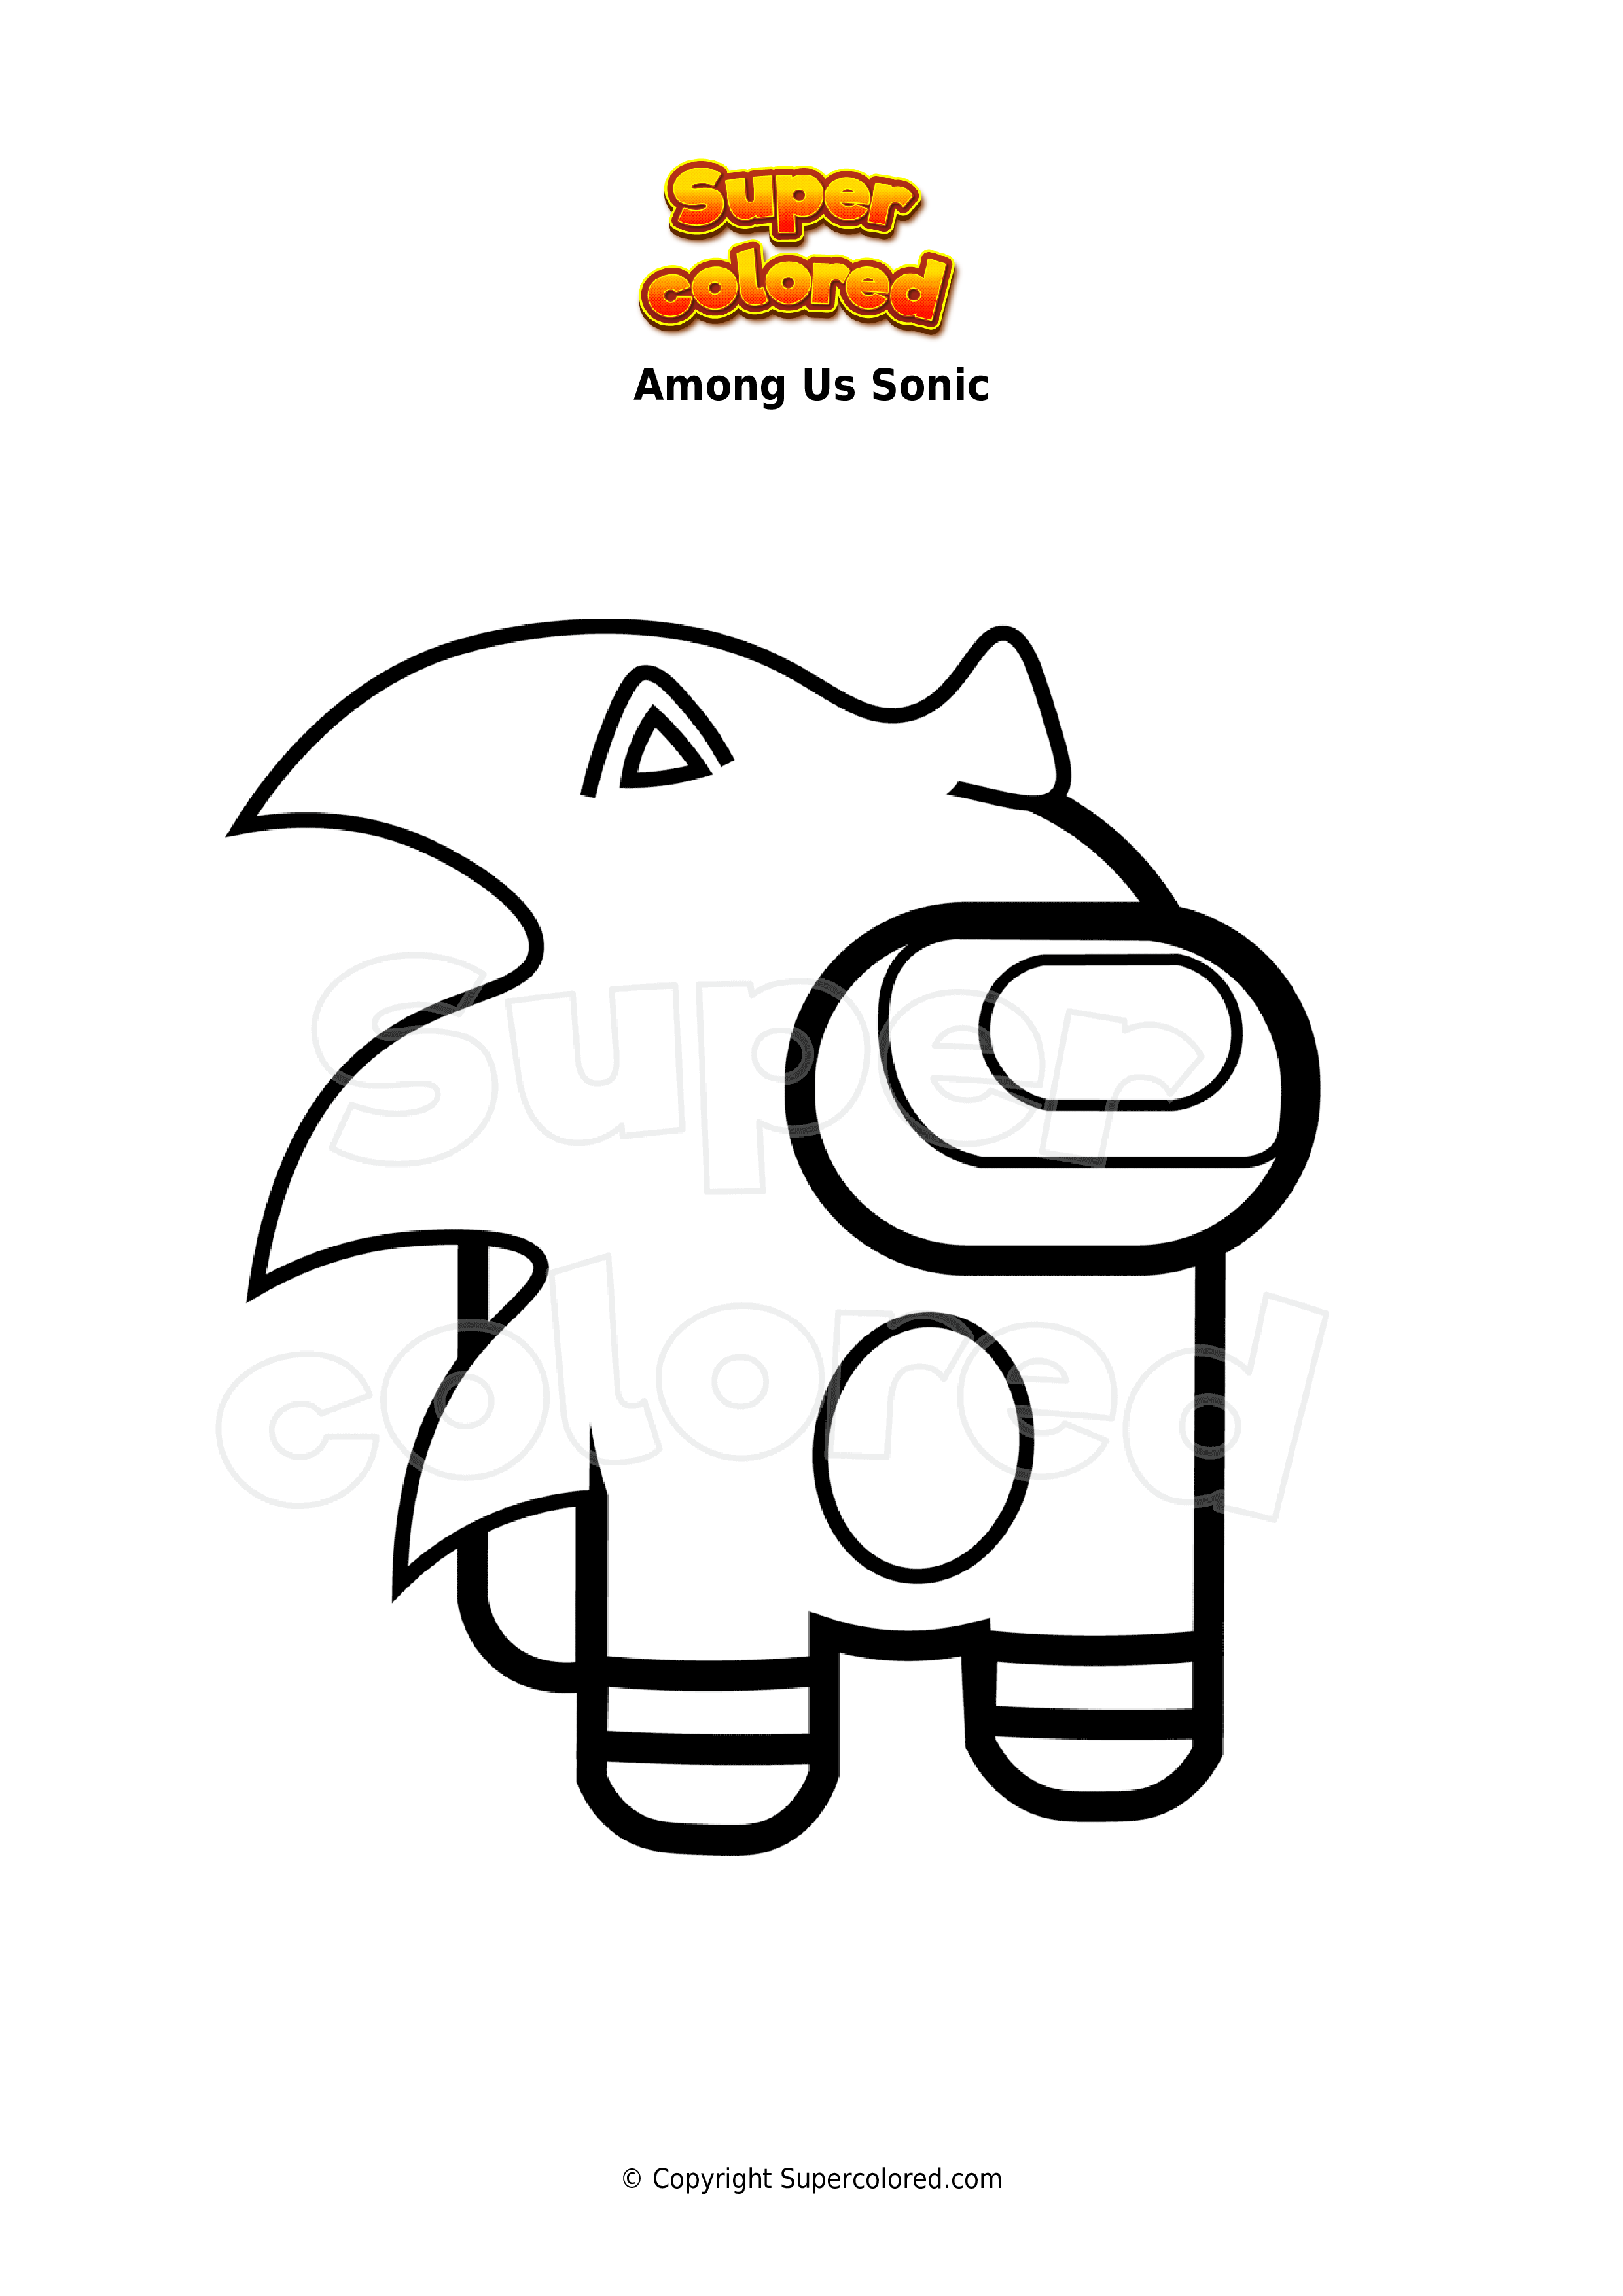 Coloring page Among Us Sonic - Supercolored.com